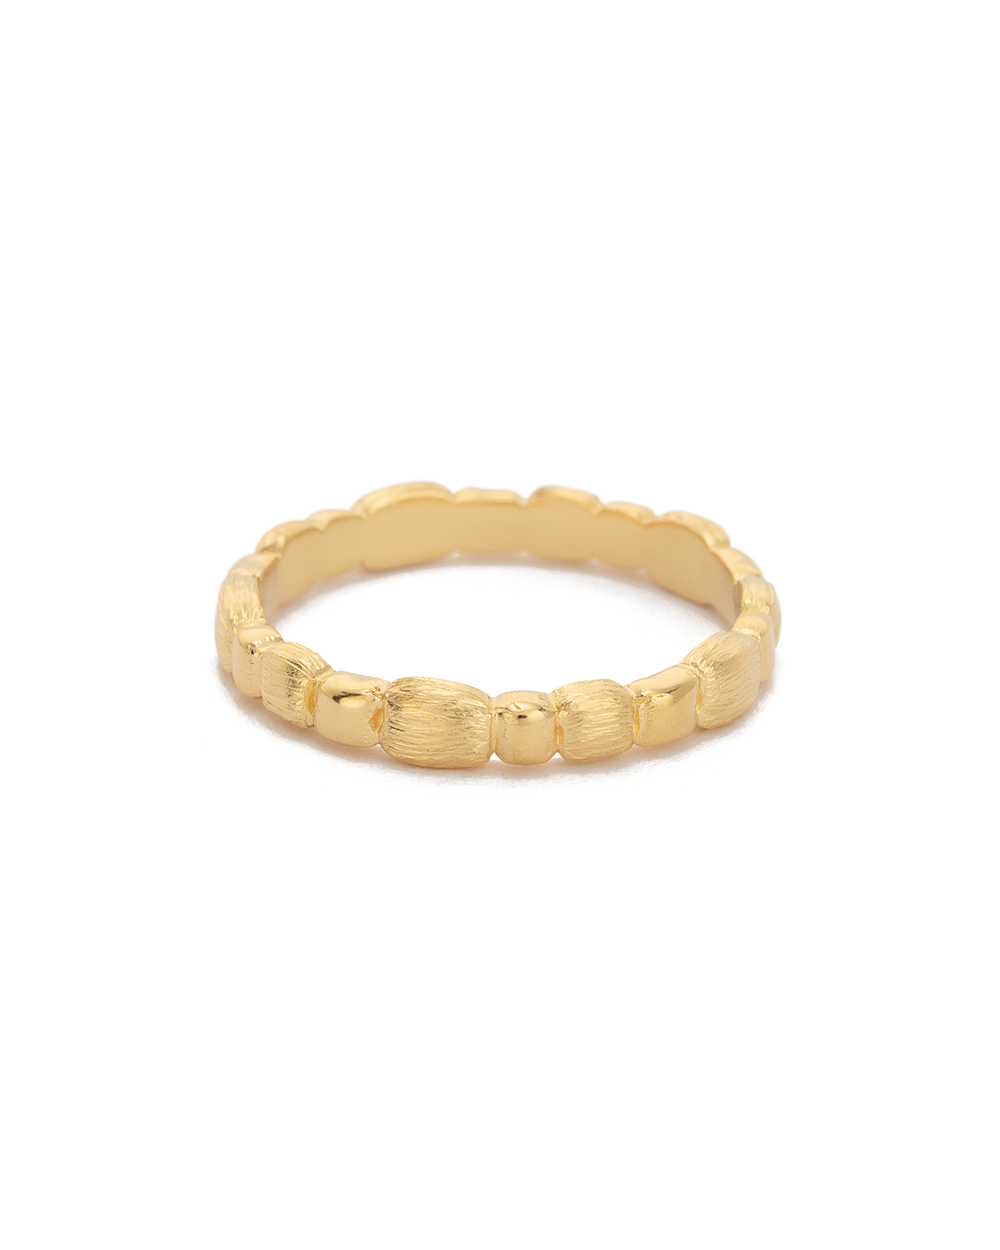 CASCADE RING (18K GOLD PLATED) - IMAGE 1